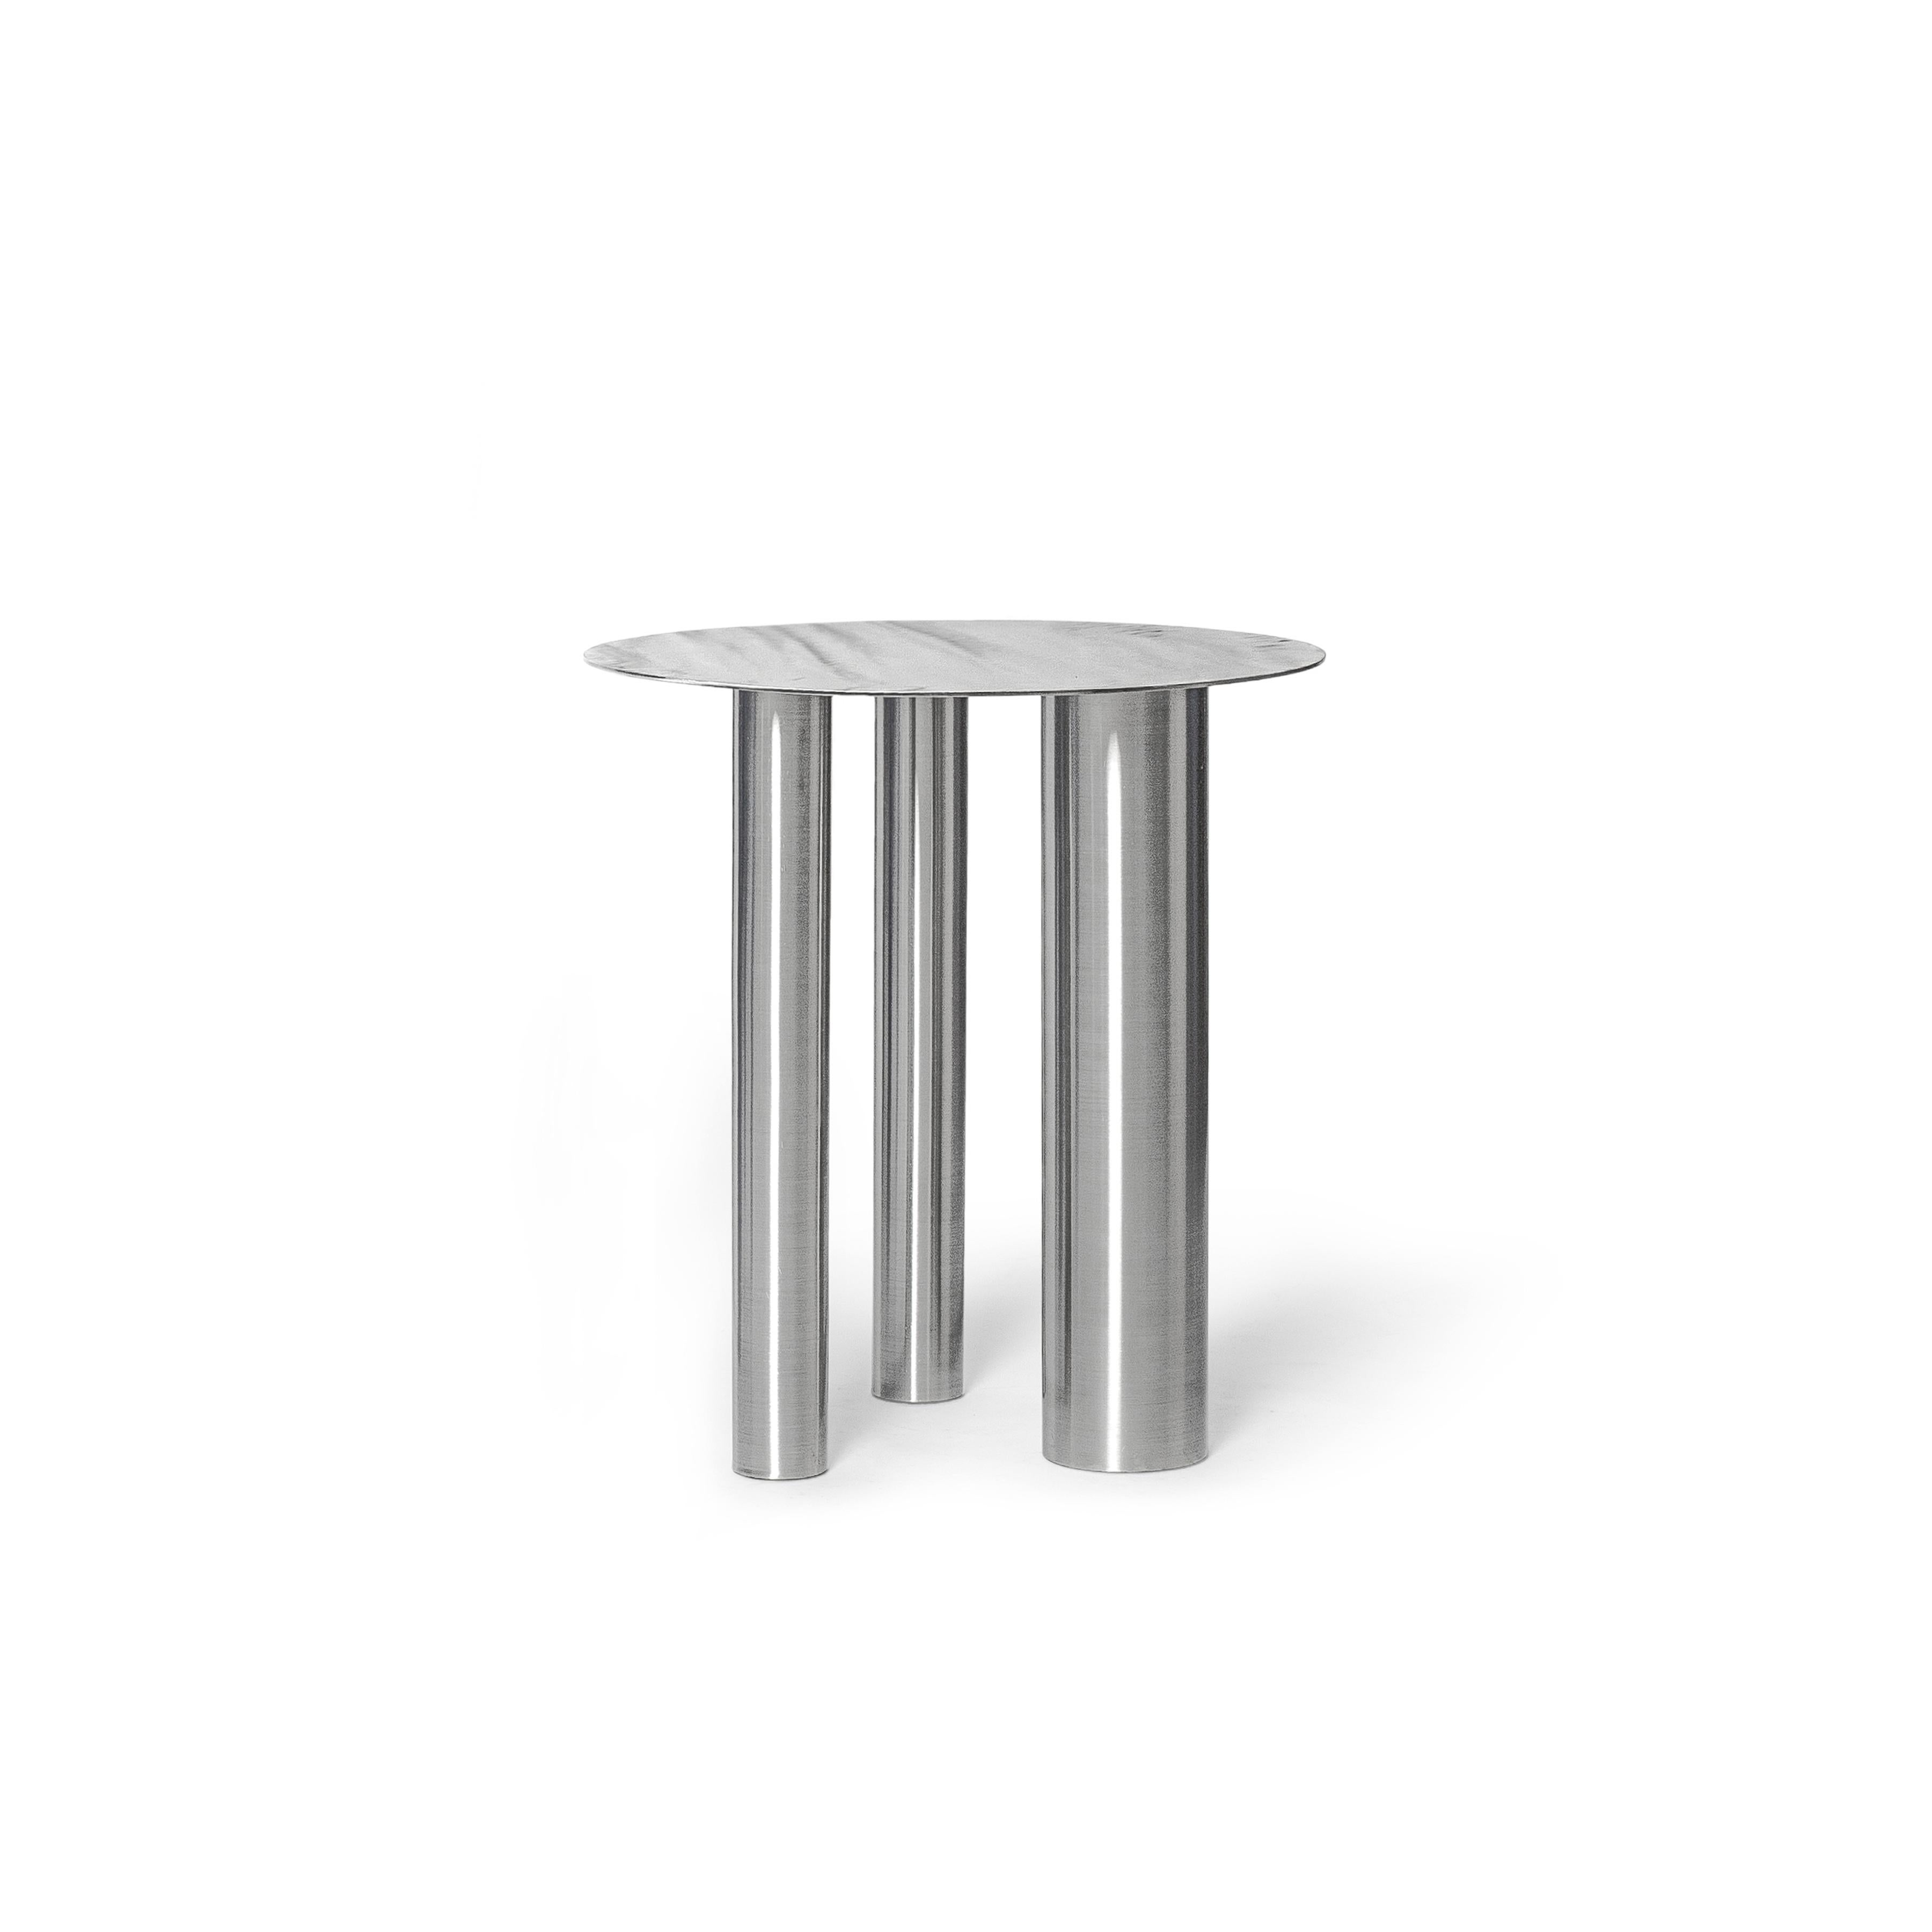 Contemporary High Coffee Table Brandt CS1 made of stainless steel by NOOM For Sale